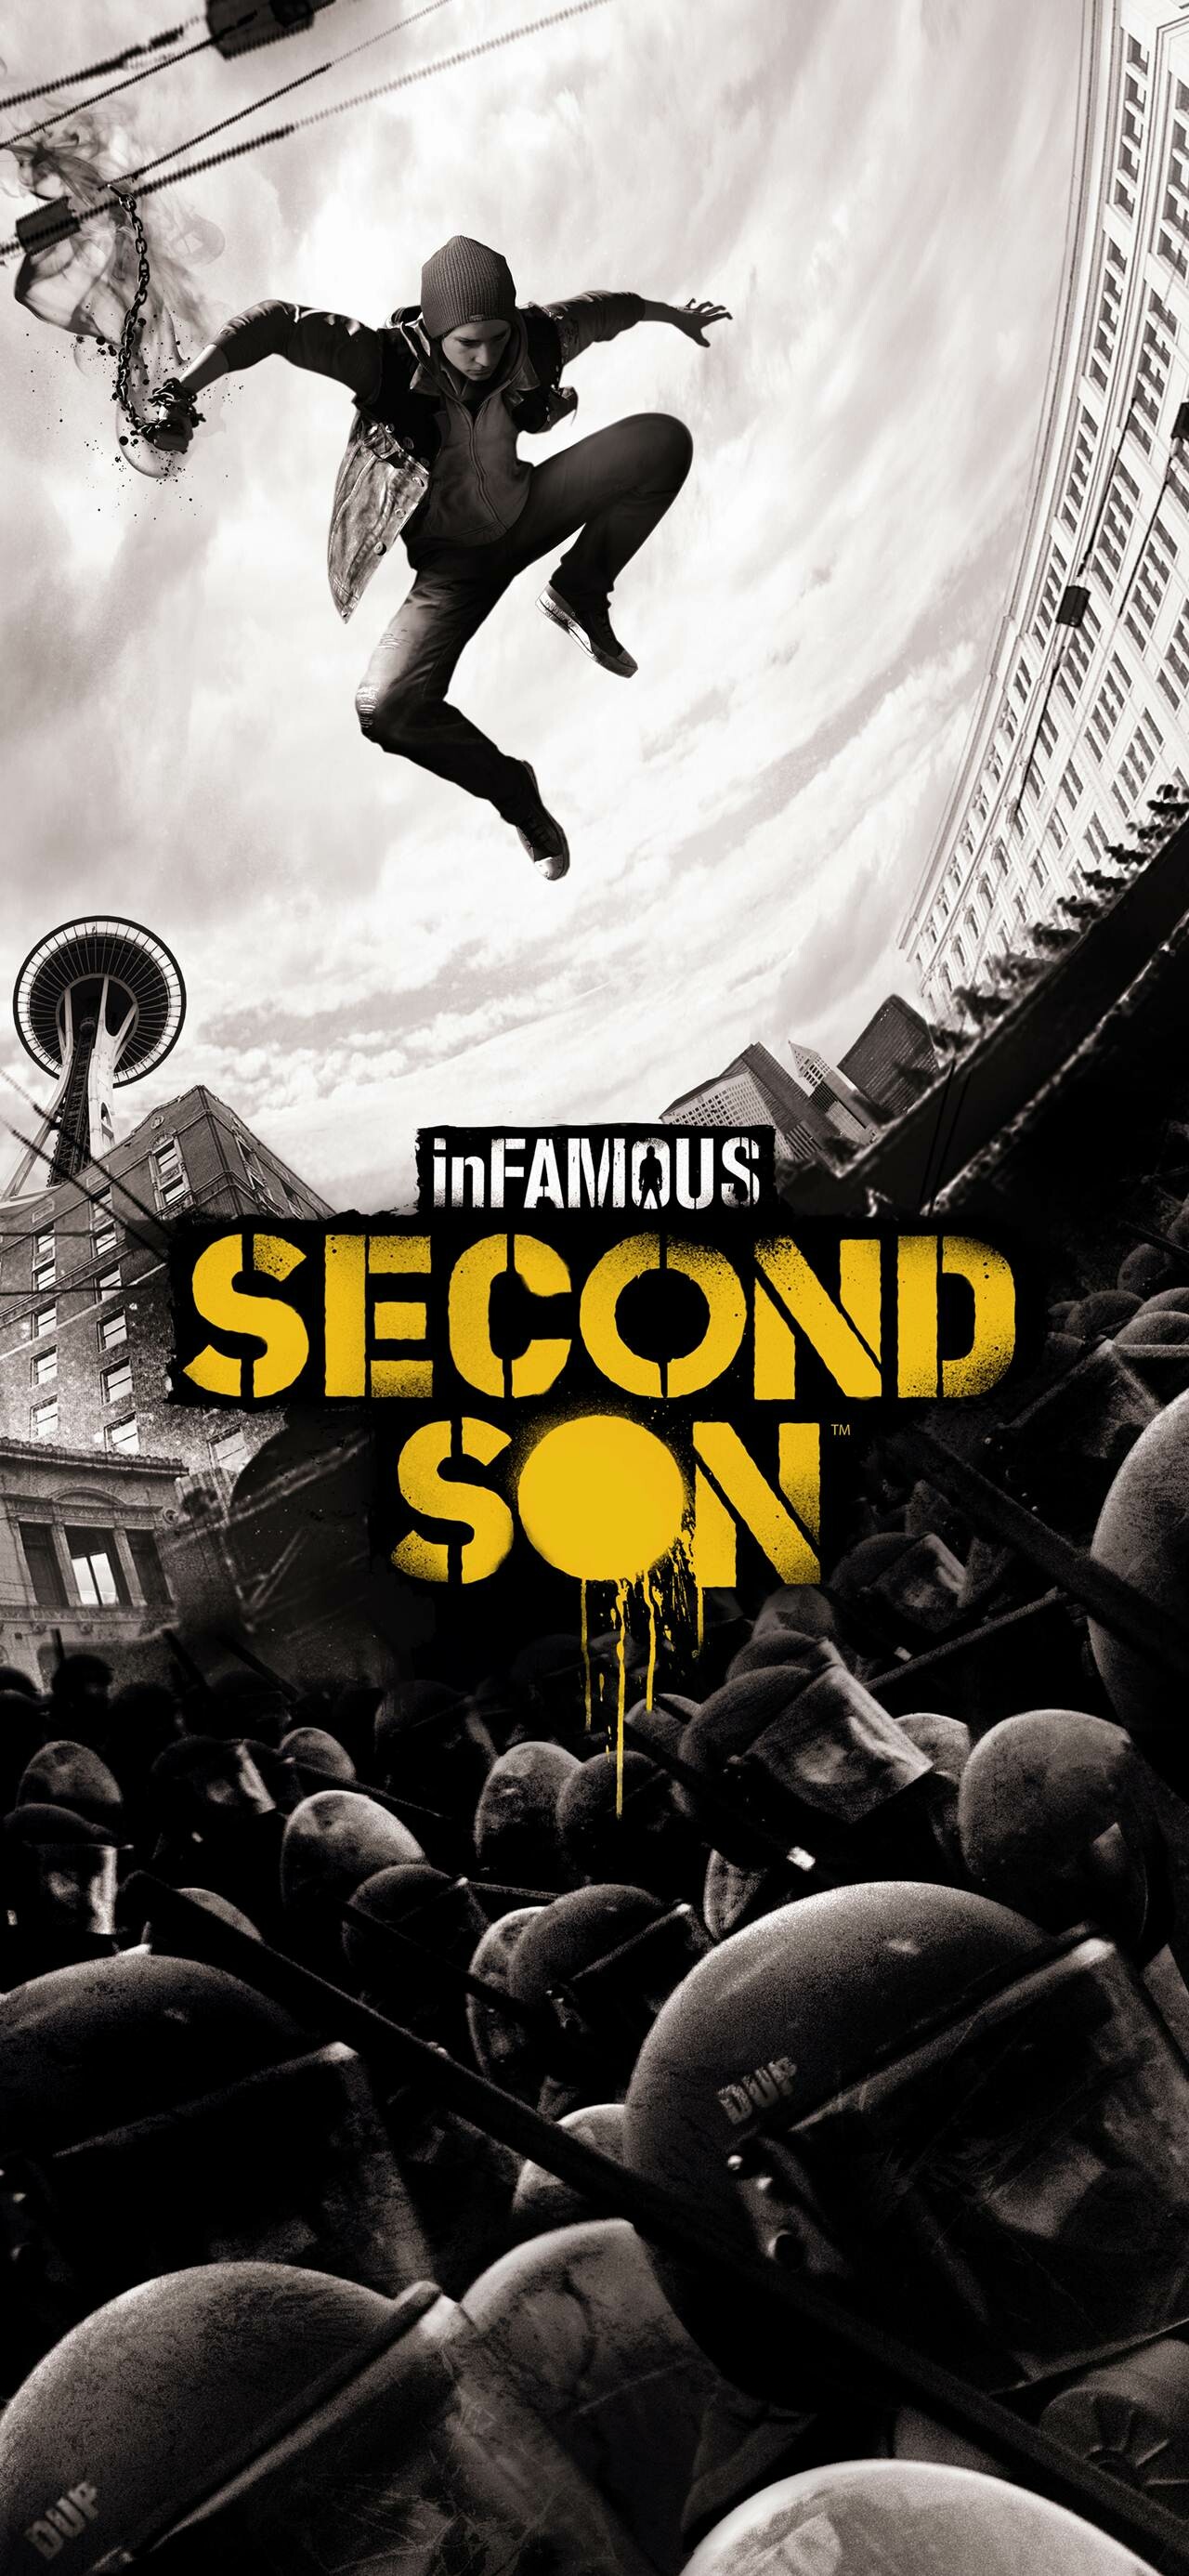 inFAMOUS: Second Son, The game introduces a new character, Delsin Rowe, a graffiti artist. 1280x2780 HD Background.